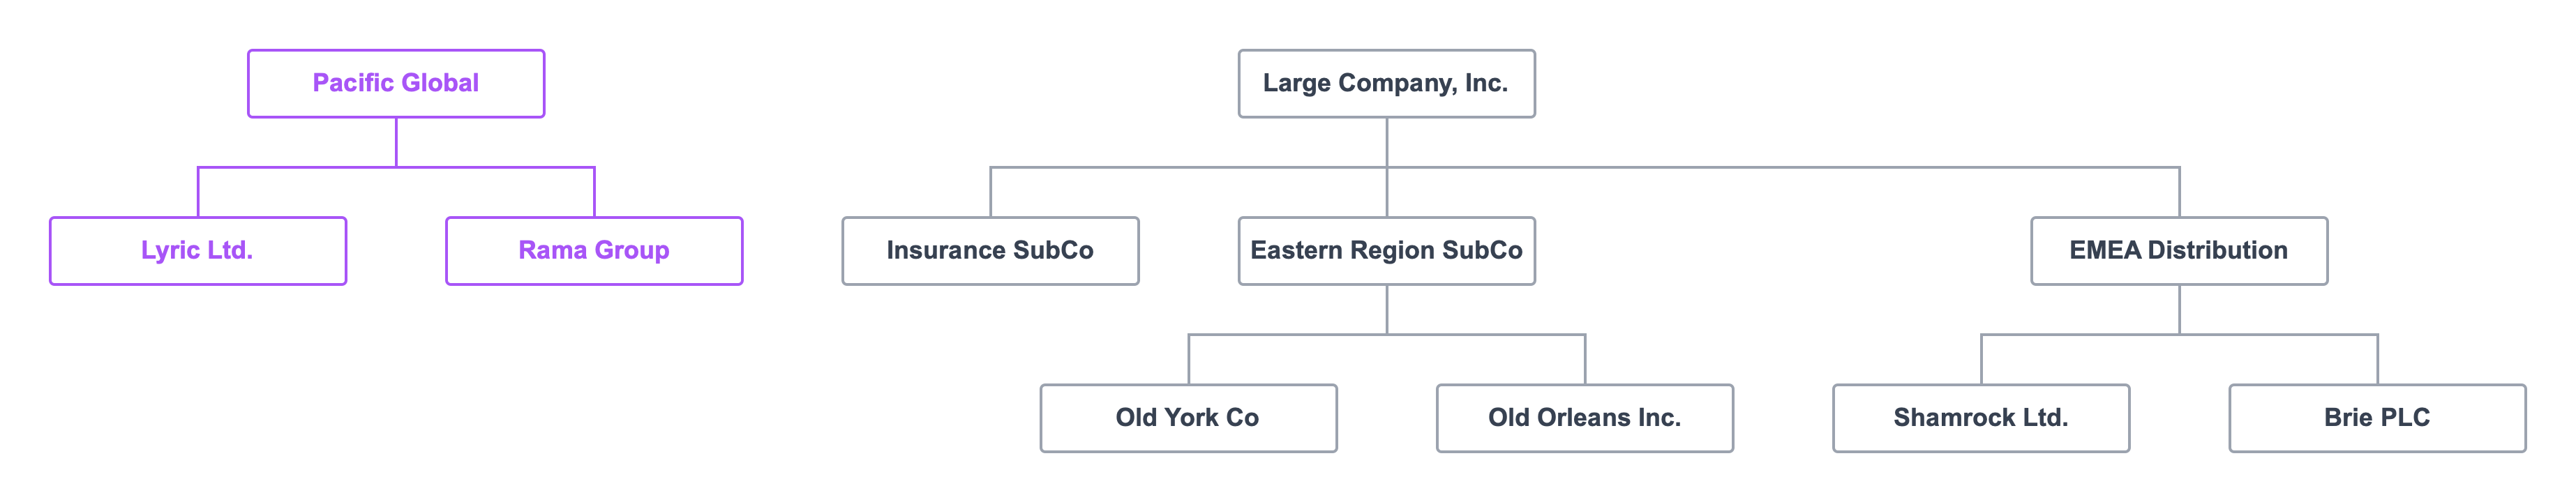 Acquisition modeling company chart